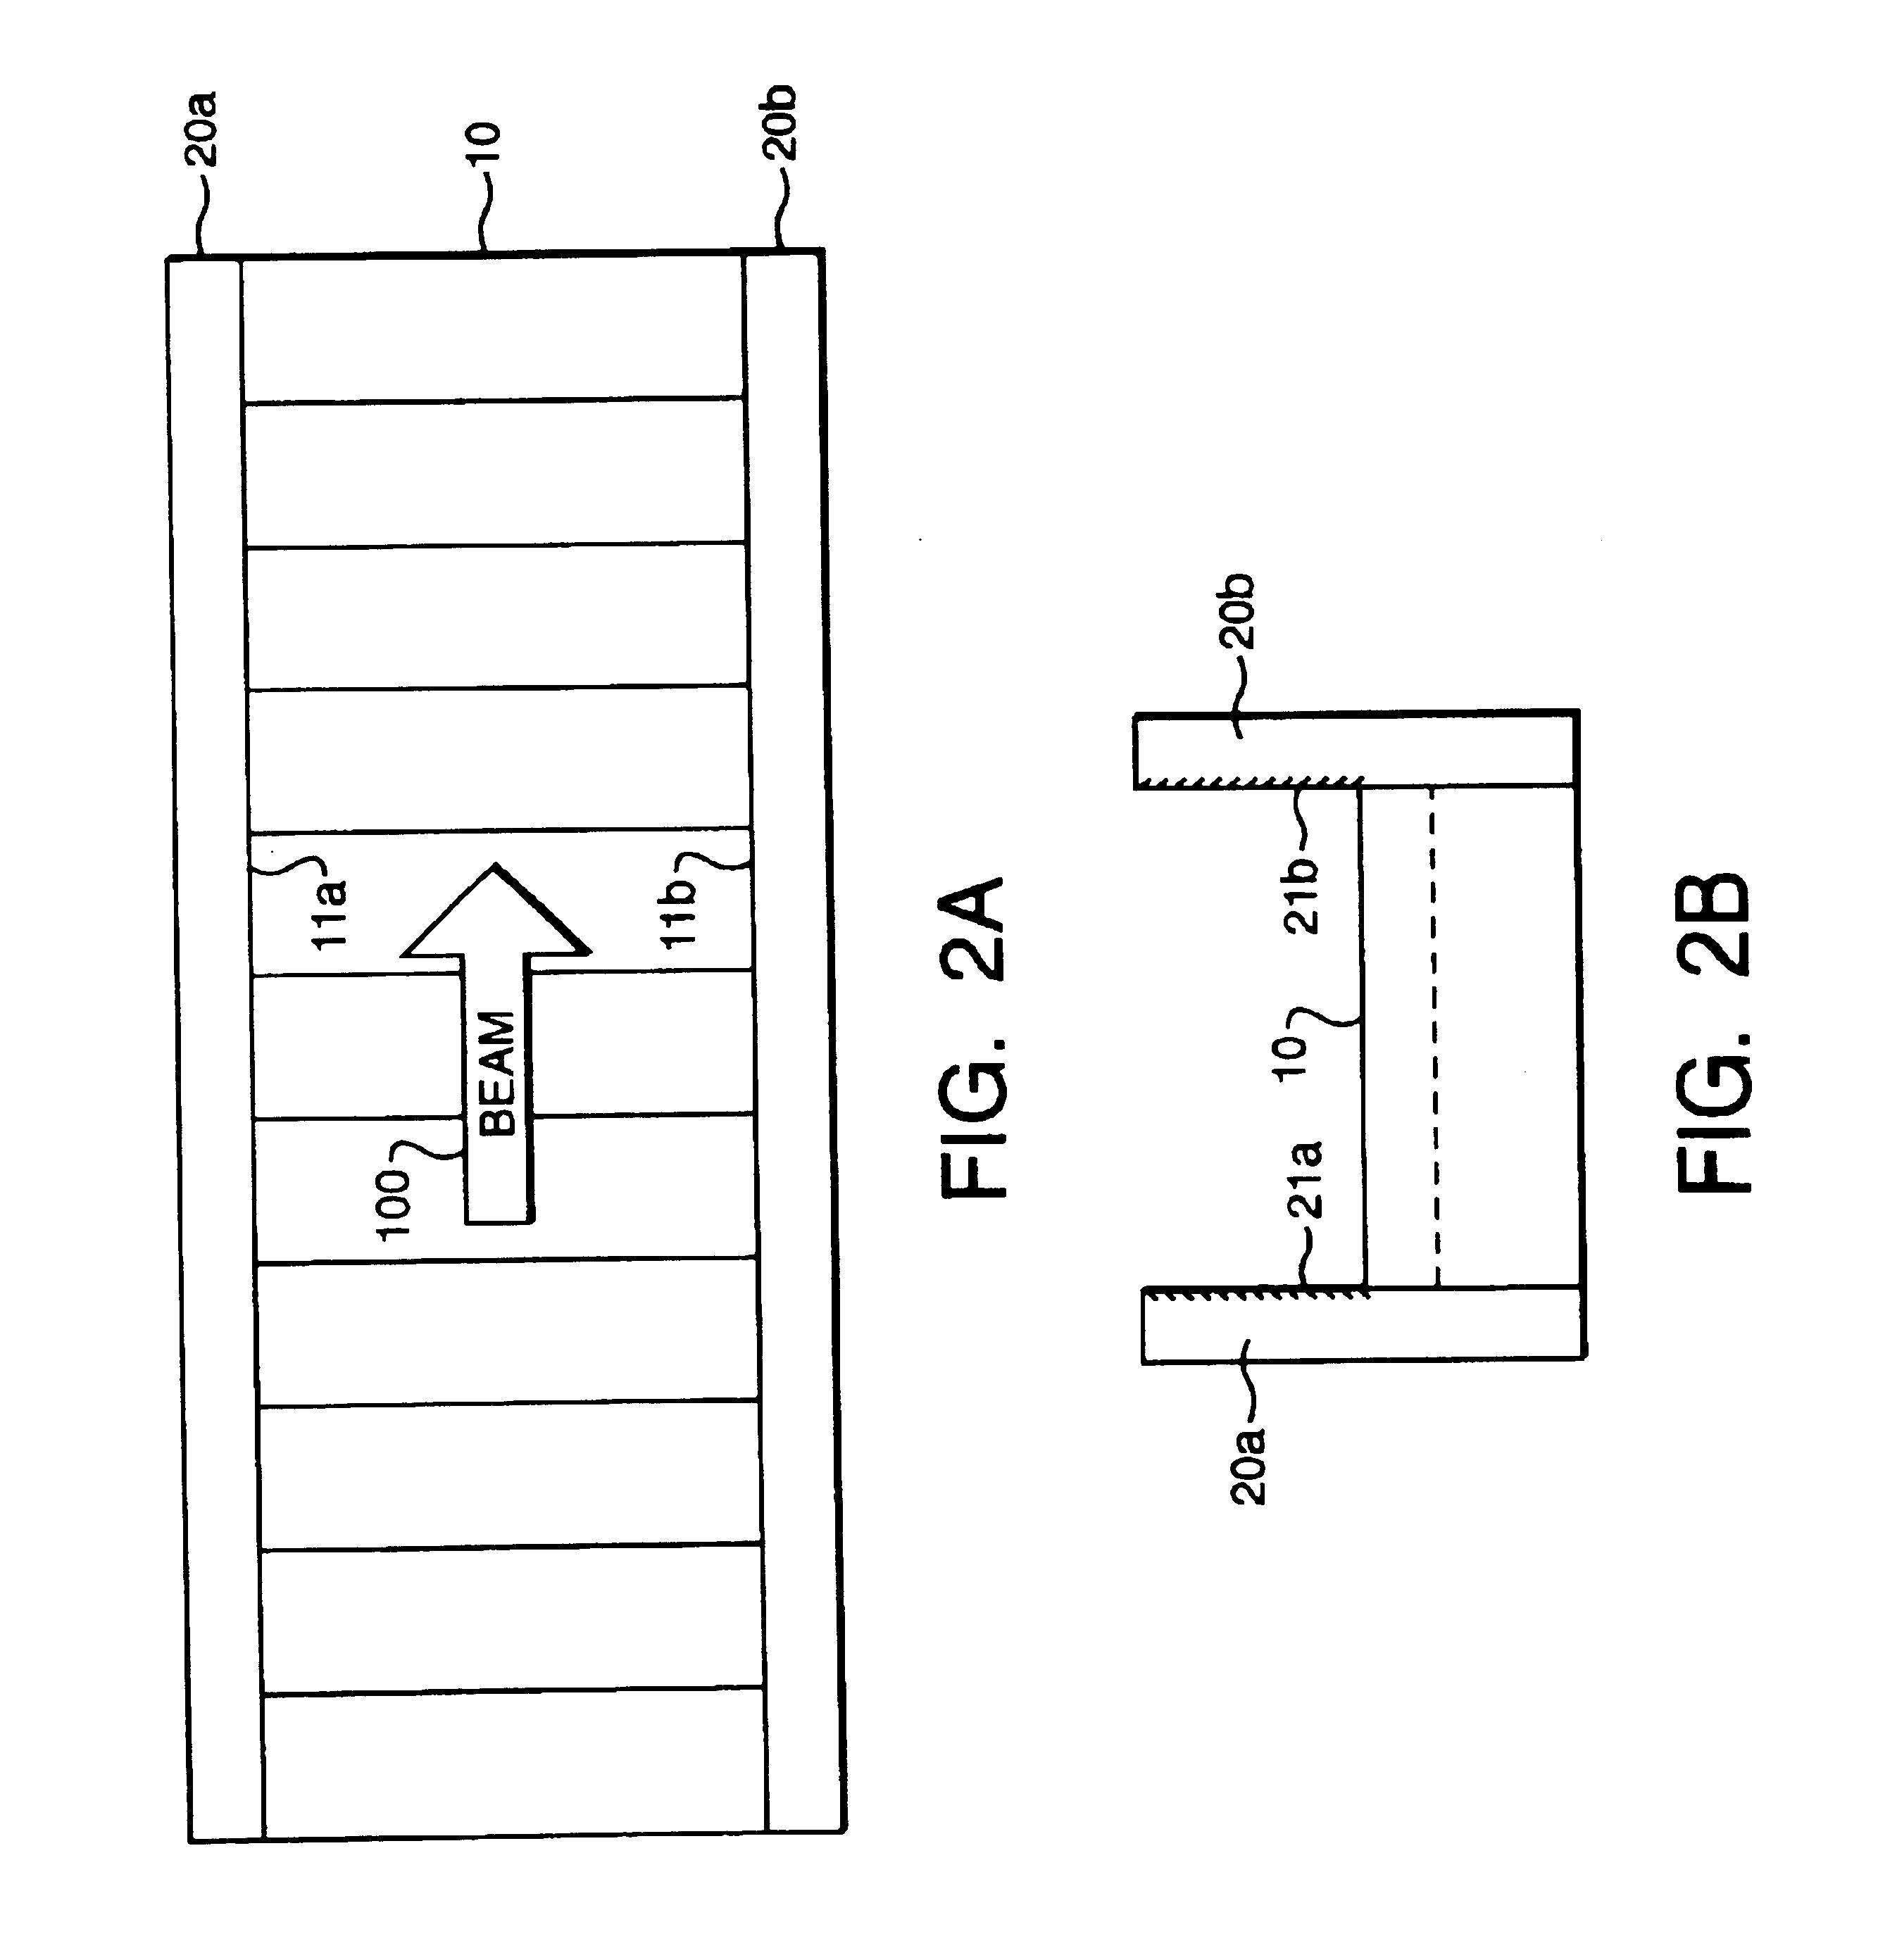 Apparatuses and methods for generating coherent electromagnetic laser radiation